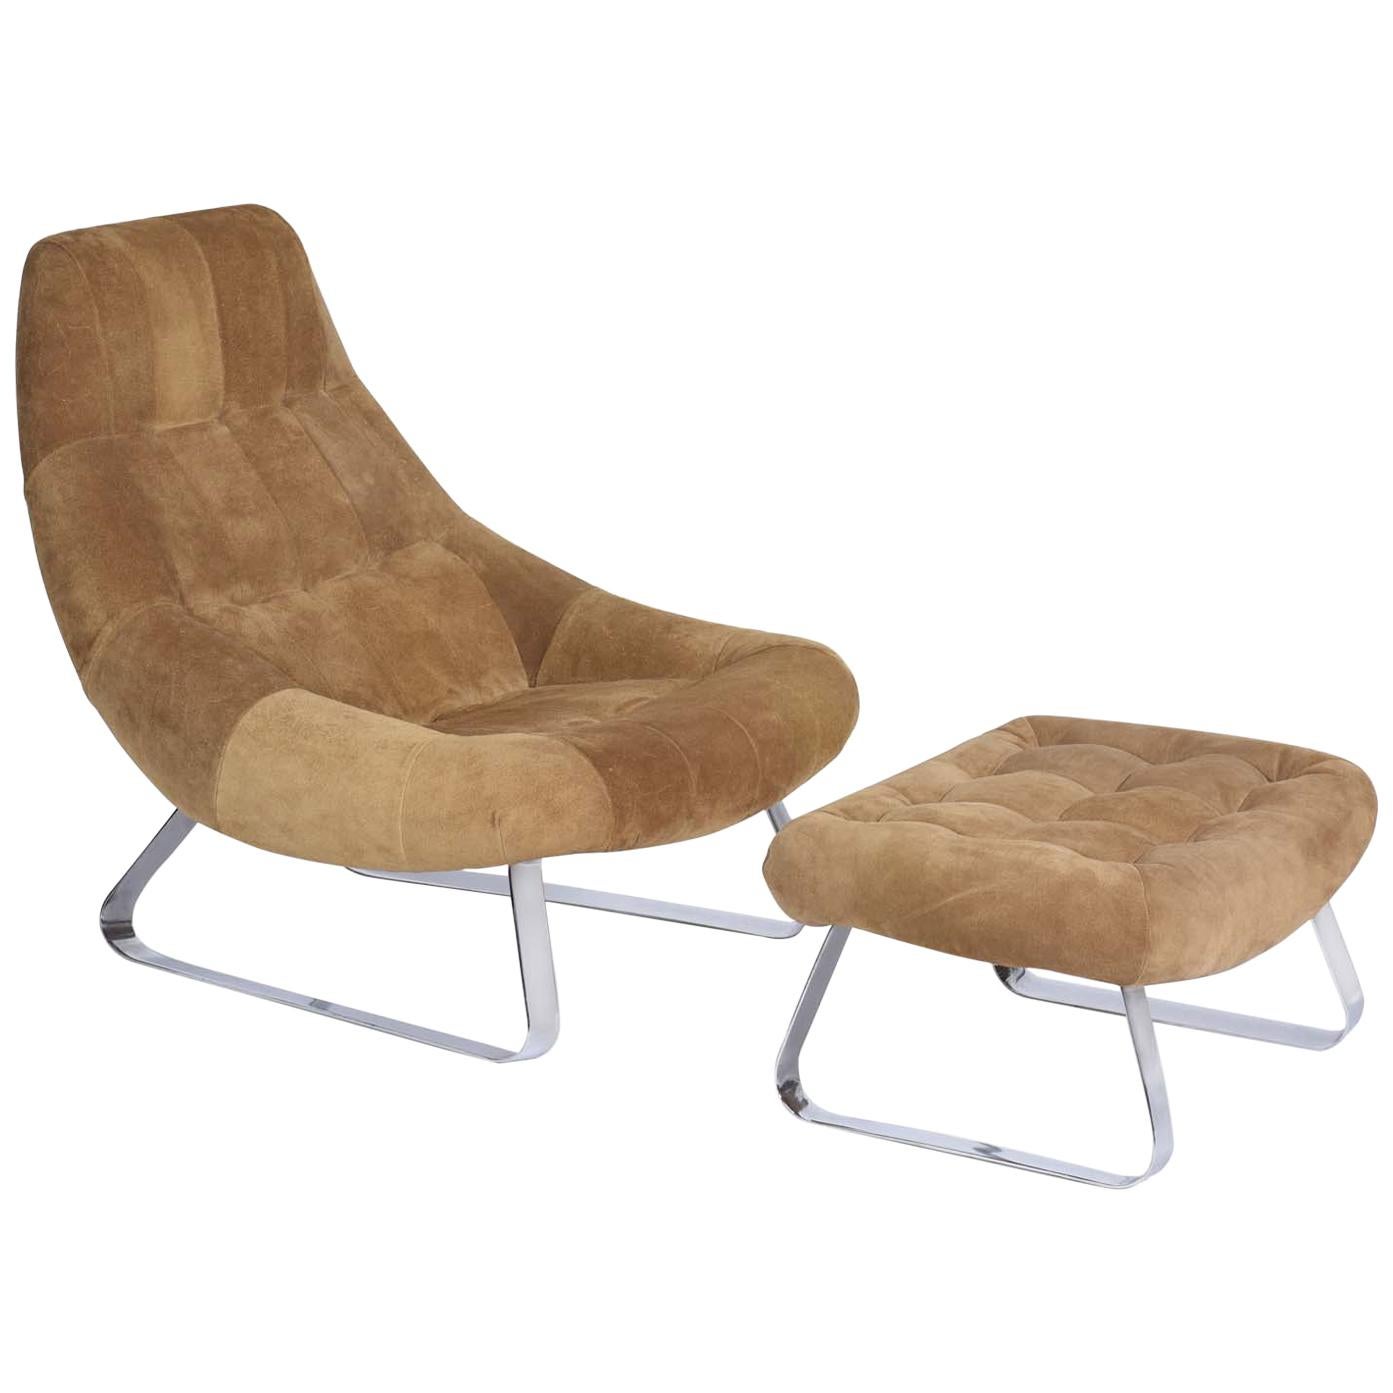 Percival Lafer Midcentury Brazilian "Earth Chair" Set Armchair and Ottoman, 1976 For Sale